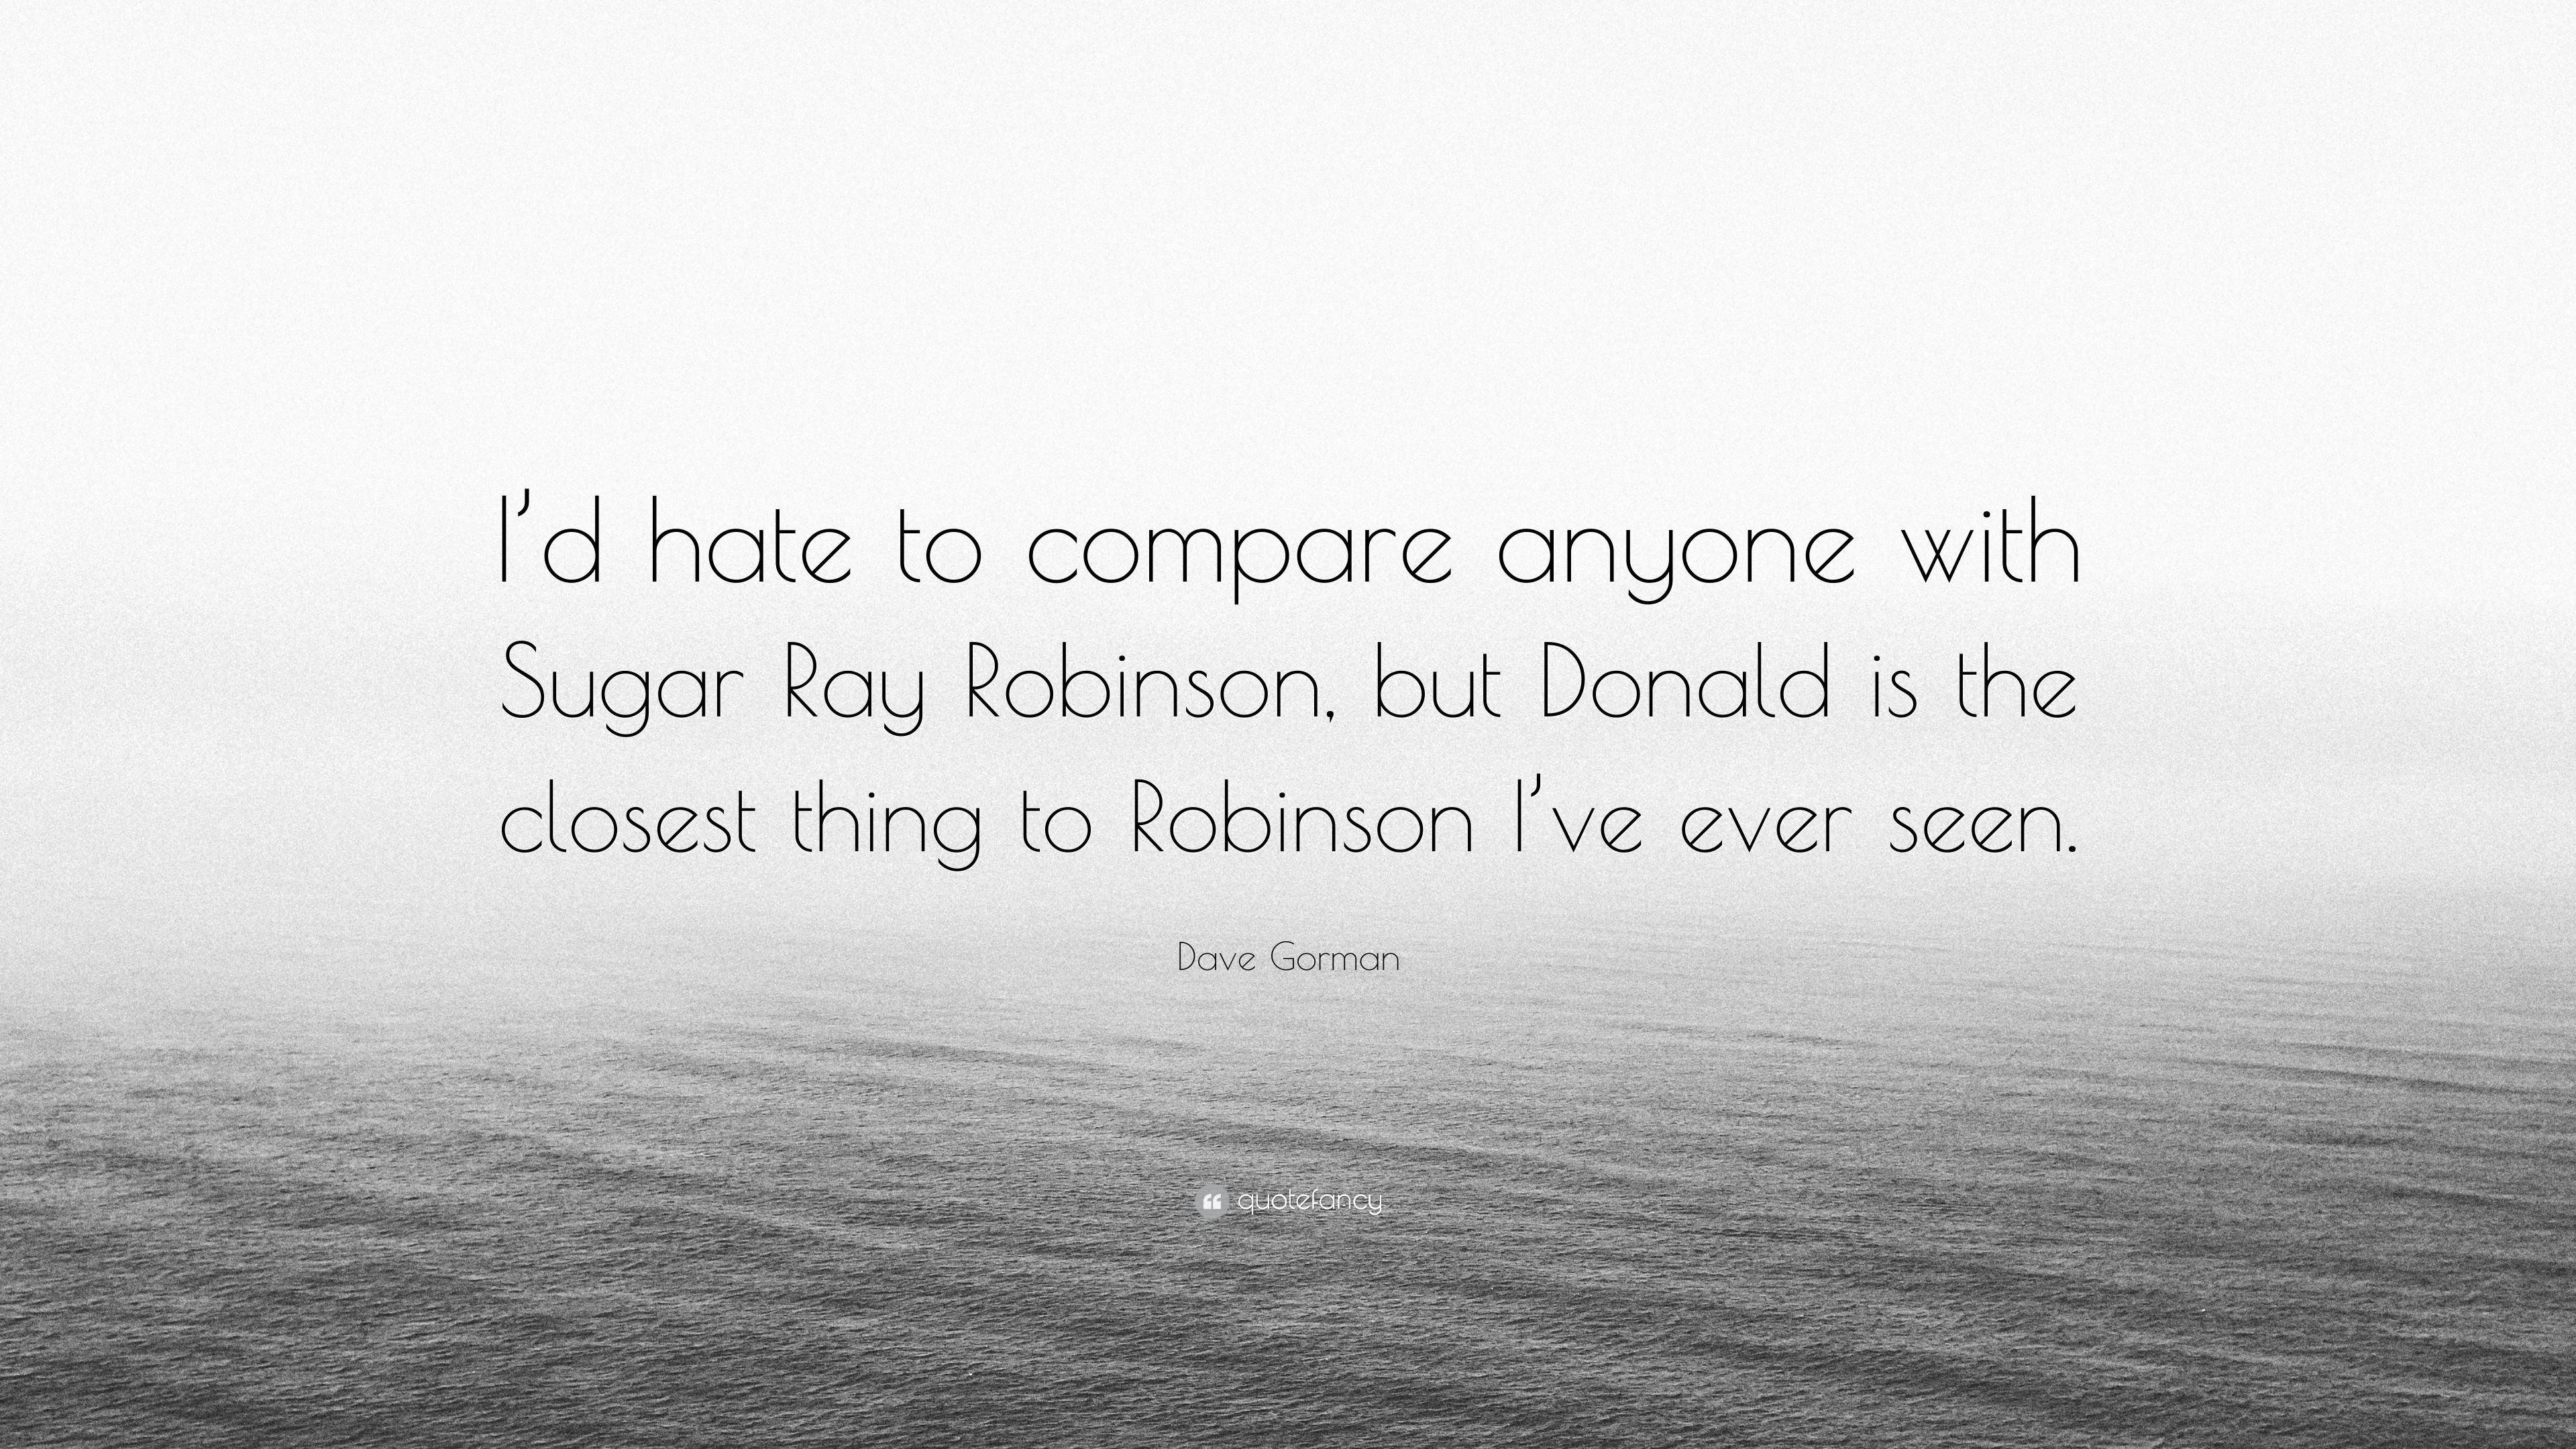 3840x2160 Dave Gorman Quote: “I'd hate to compare anyone with Sugar Ray Robinson